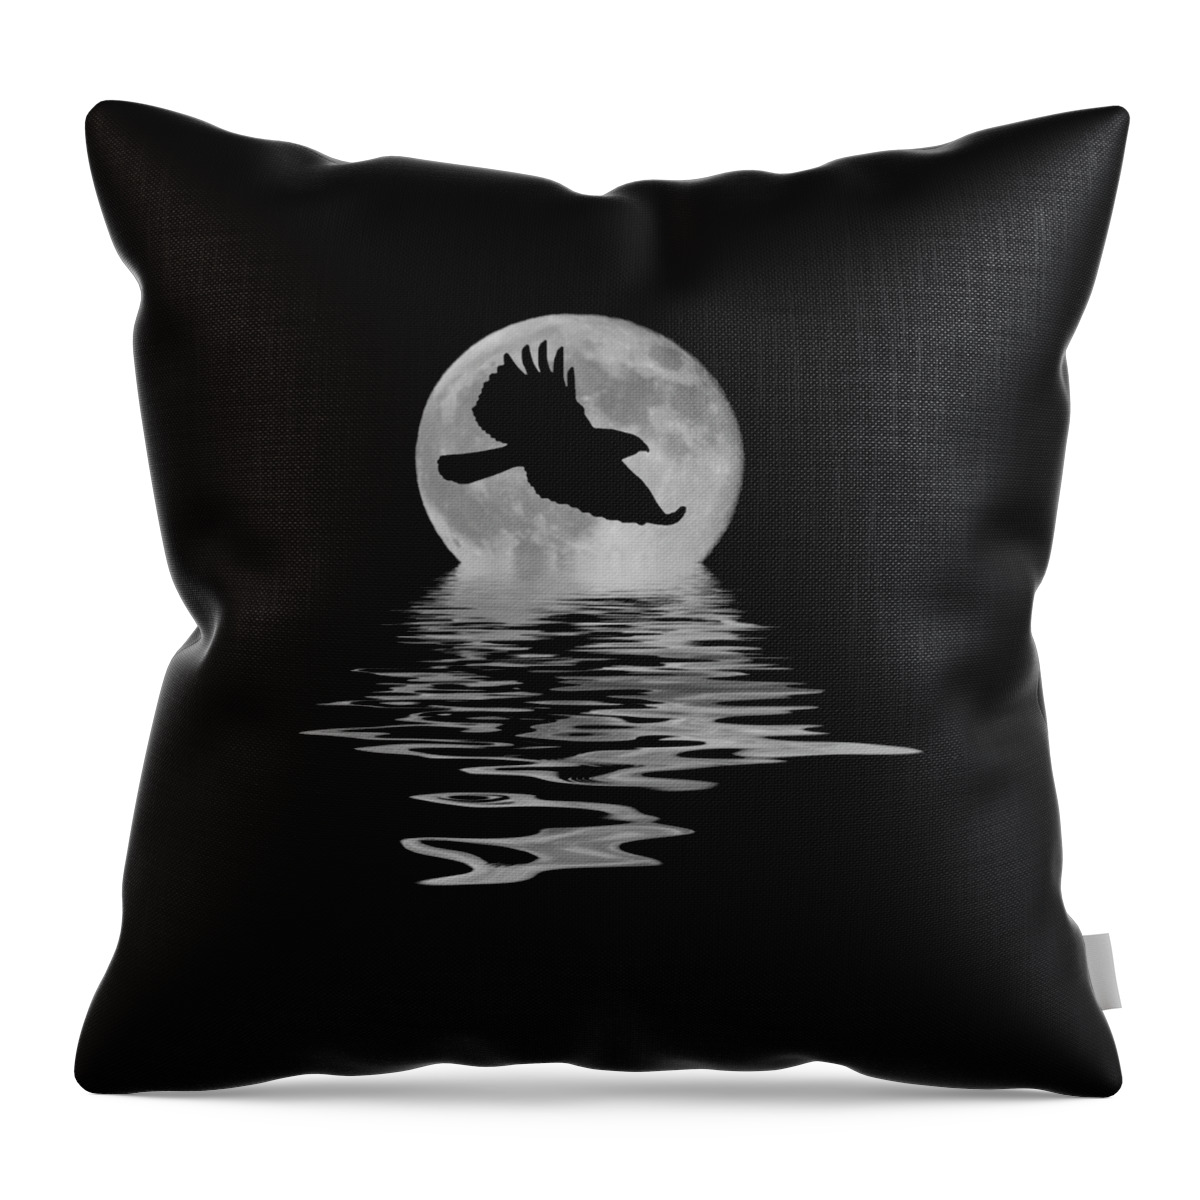 Hawk Throw Pillow featuring the photograph Hawk In The Moonlight by Shane Bechler